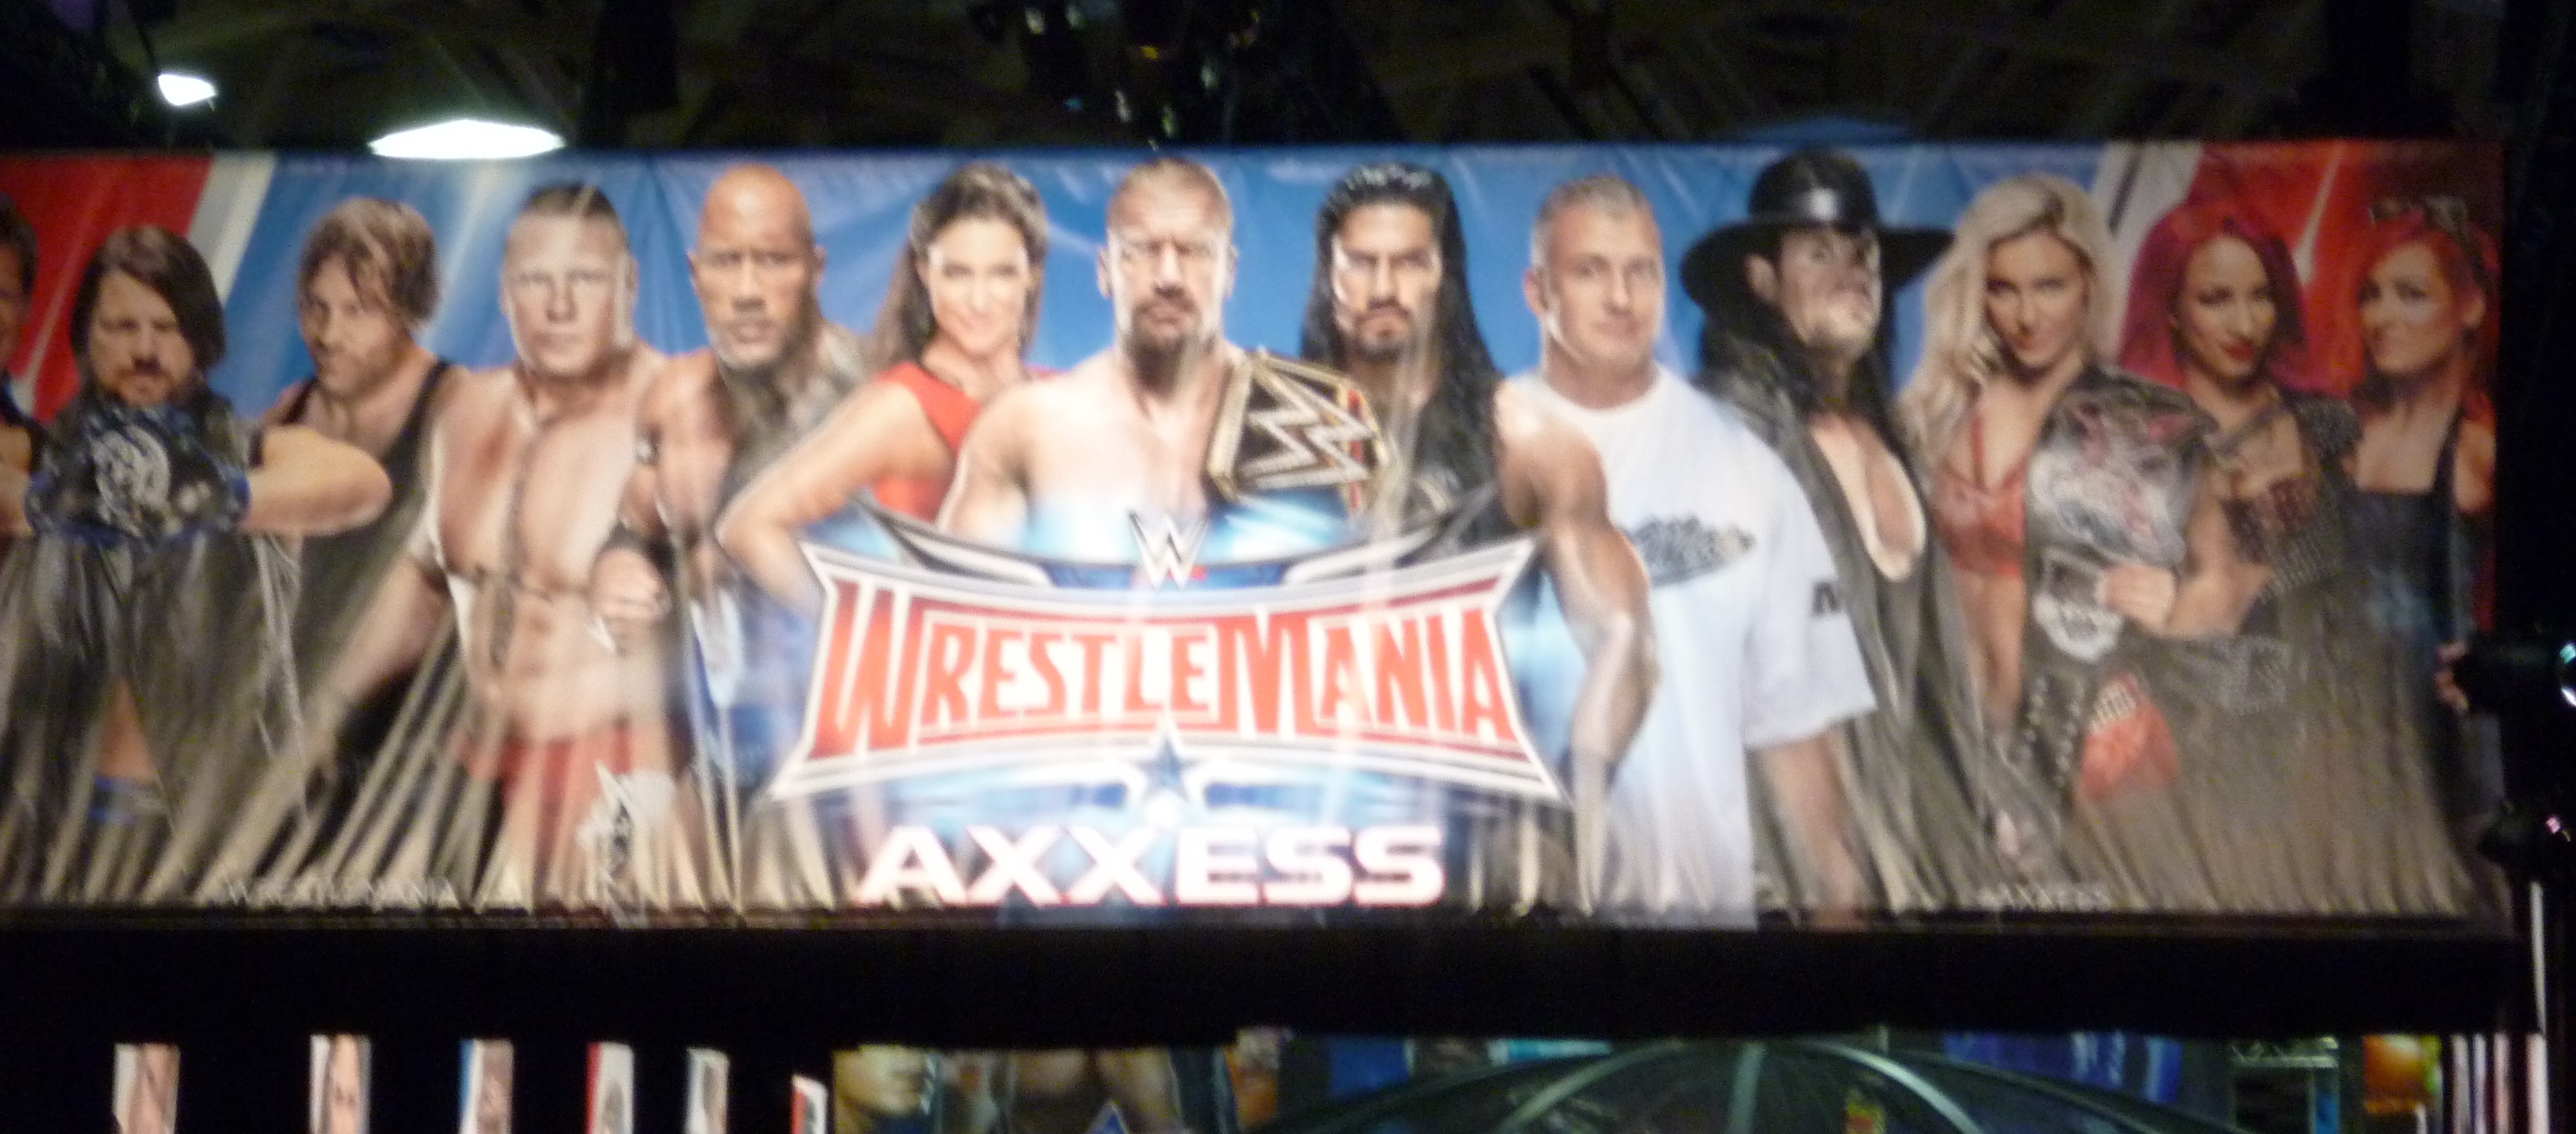 Dallas Diaries Day 2: Axxess and WWE Hall of Fame